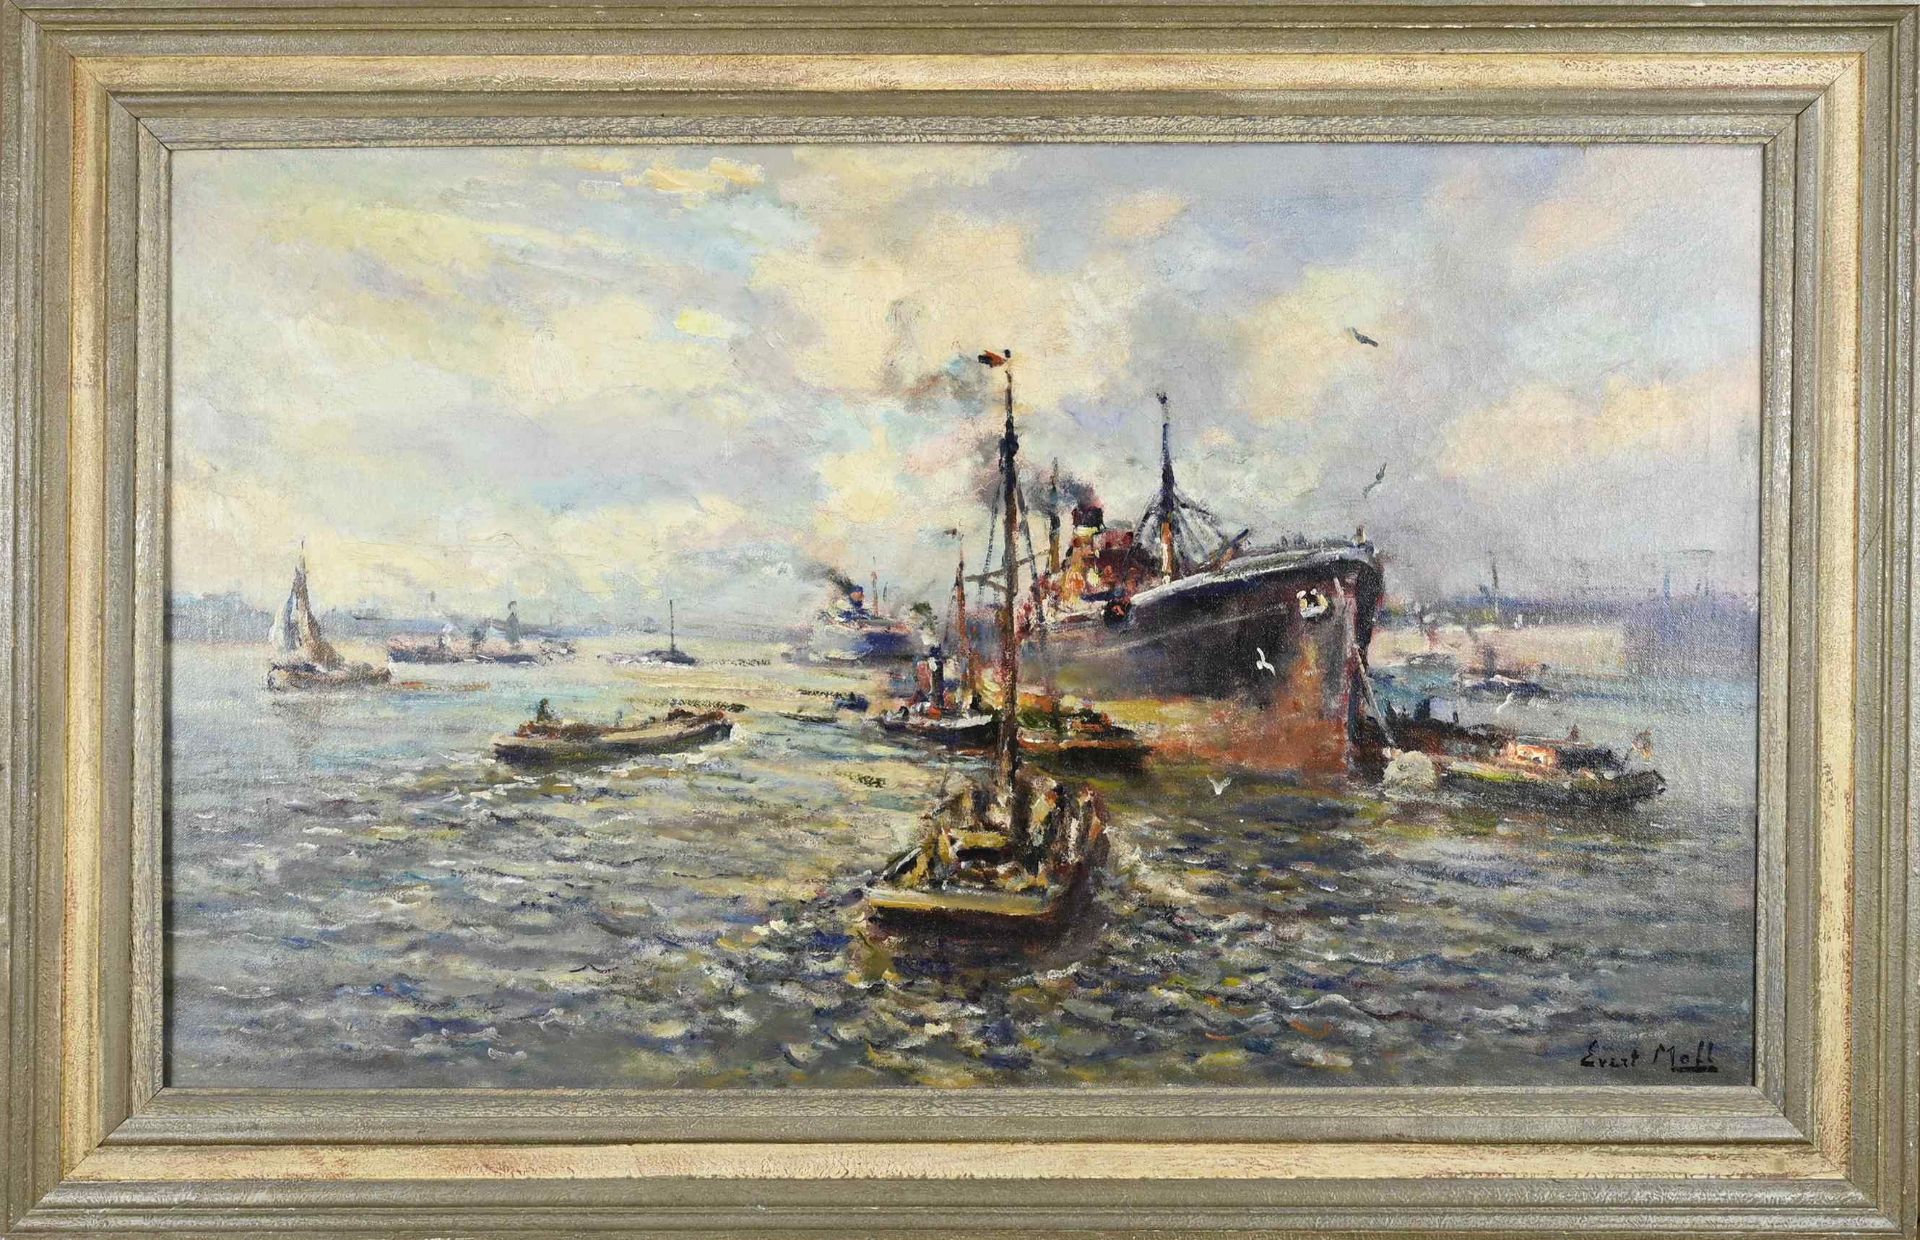 Evert Moll, Rotterdam harbor with ships